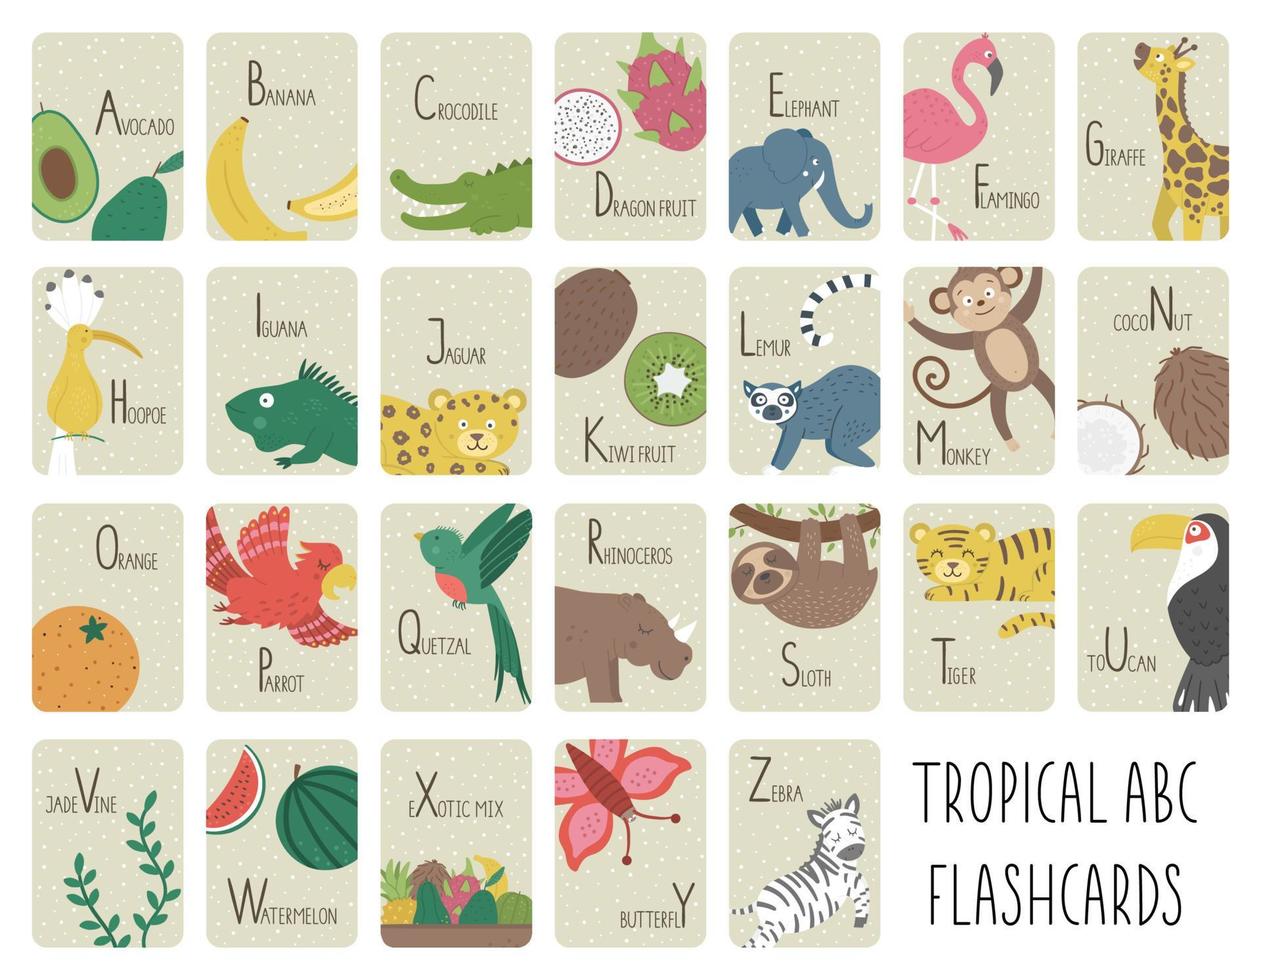 Tropical alphabet cards for children. Cute cartoon ABC set with exotic animals, birds, fruits, insects. Funny jungle flashcards for teaching reading or phonics for kids. English language letters pack vector